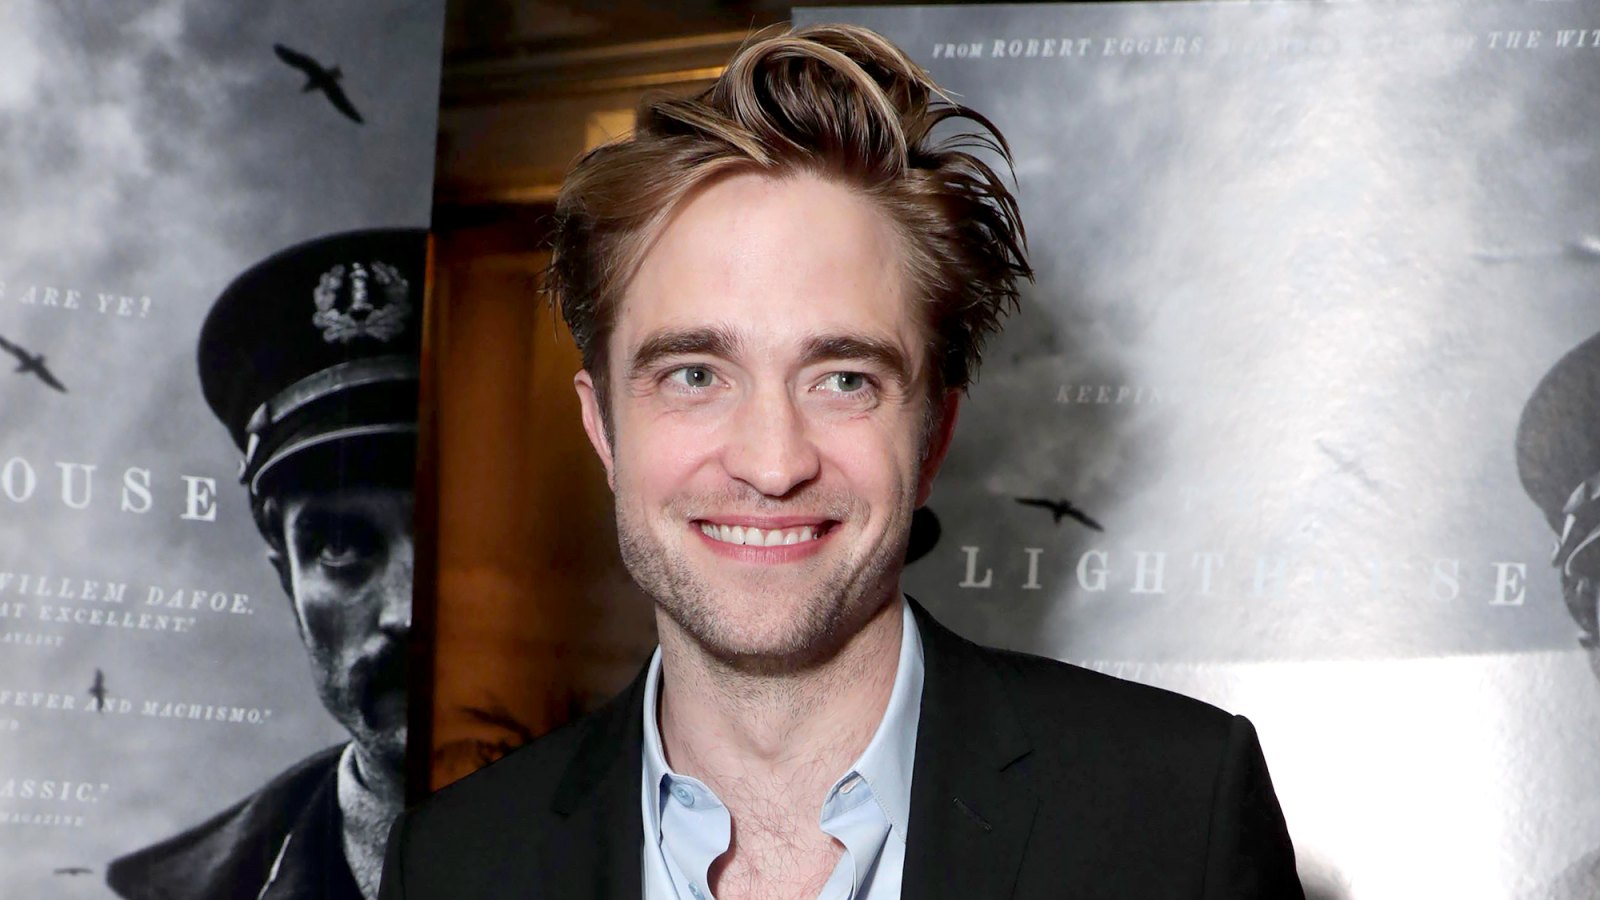 Robert Pattinson Nearly Burned Down His House While Microwaving Pasta